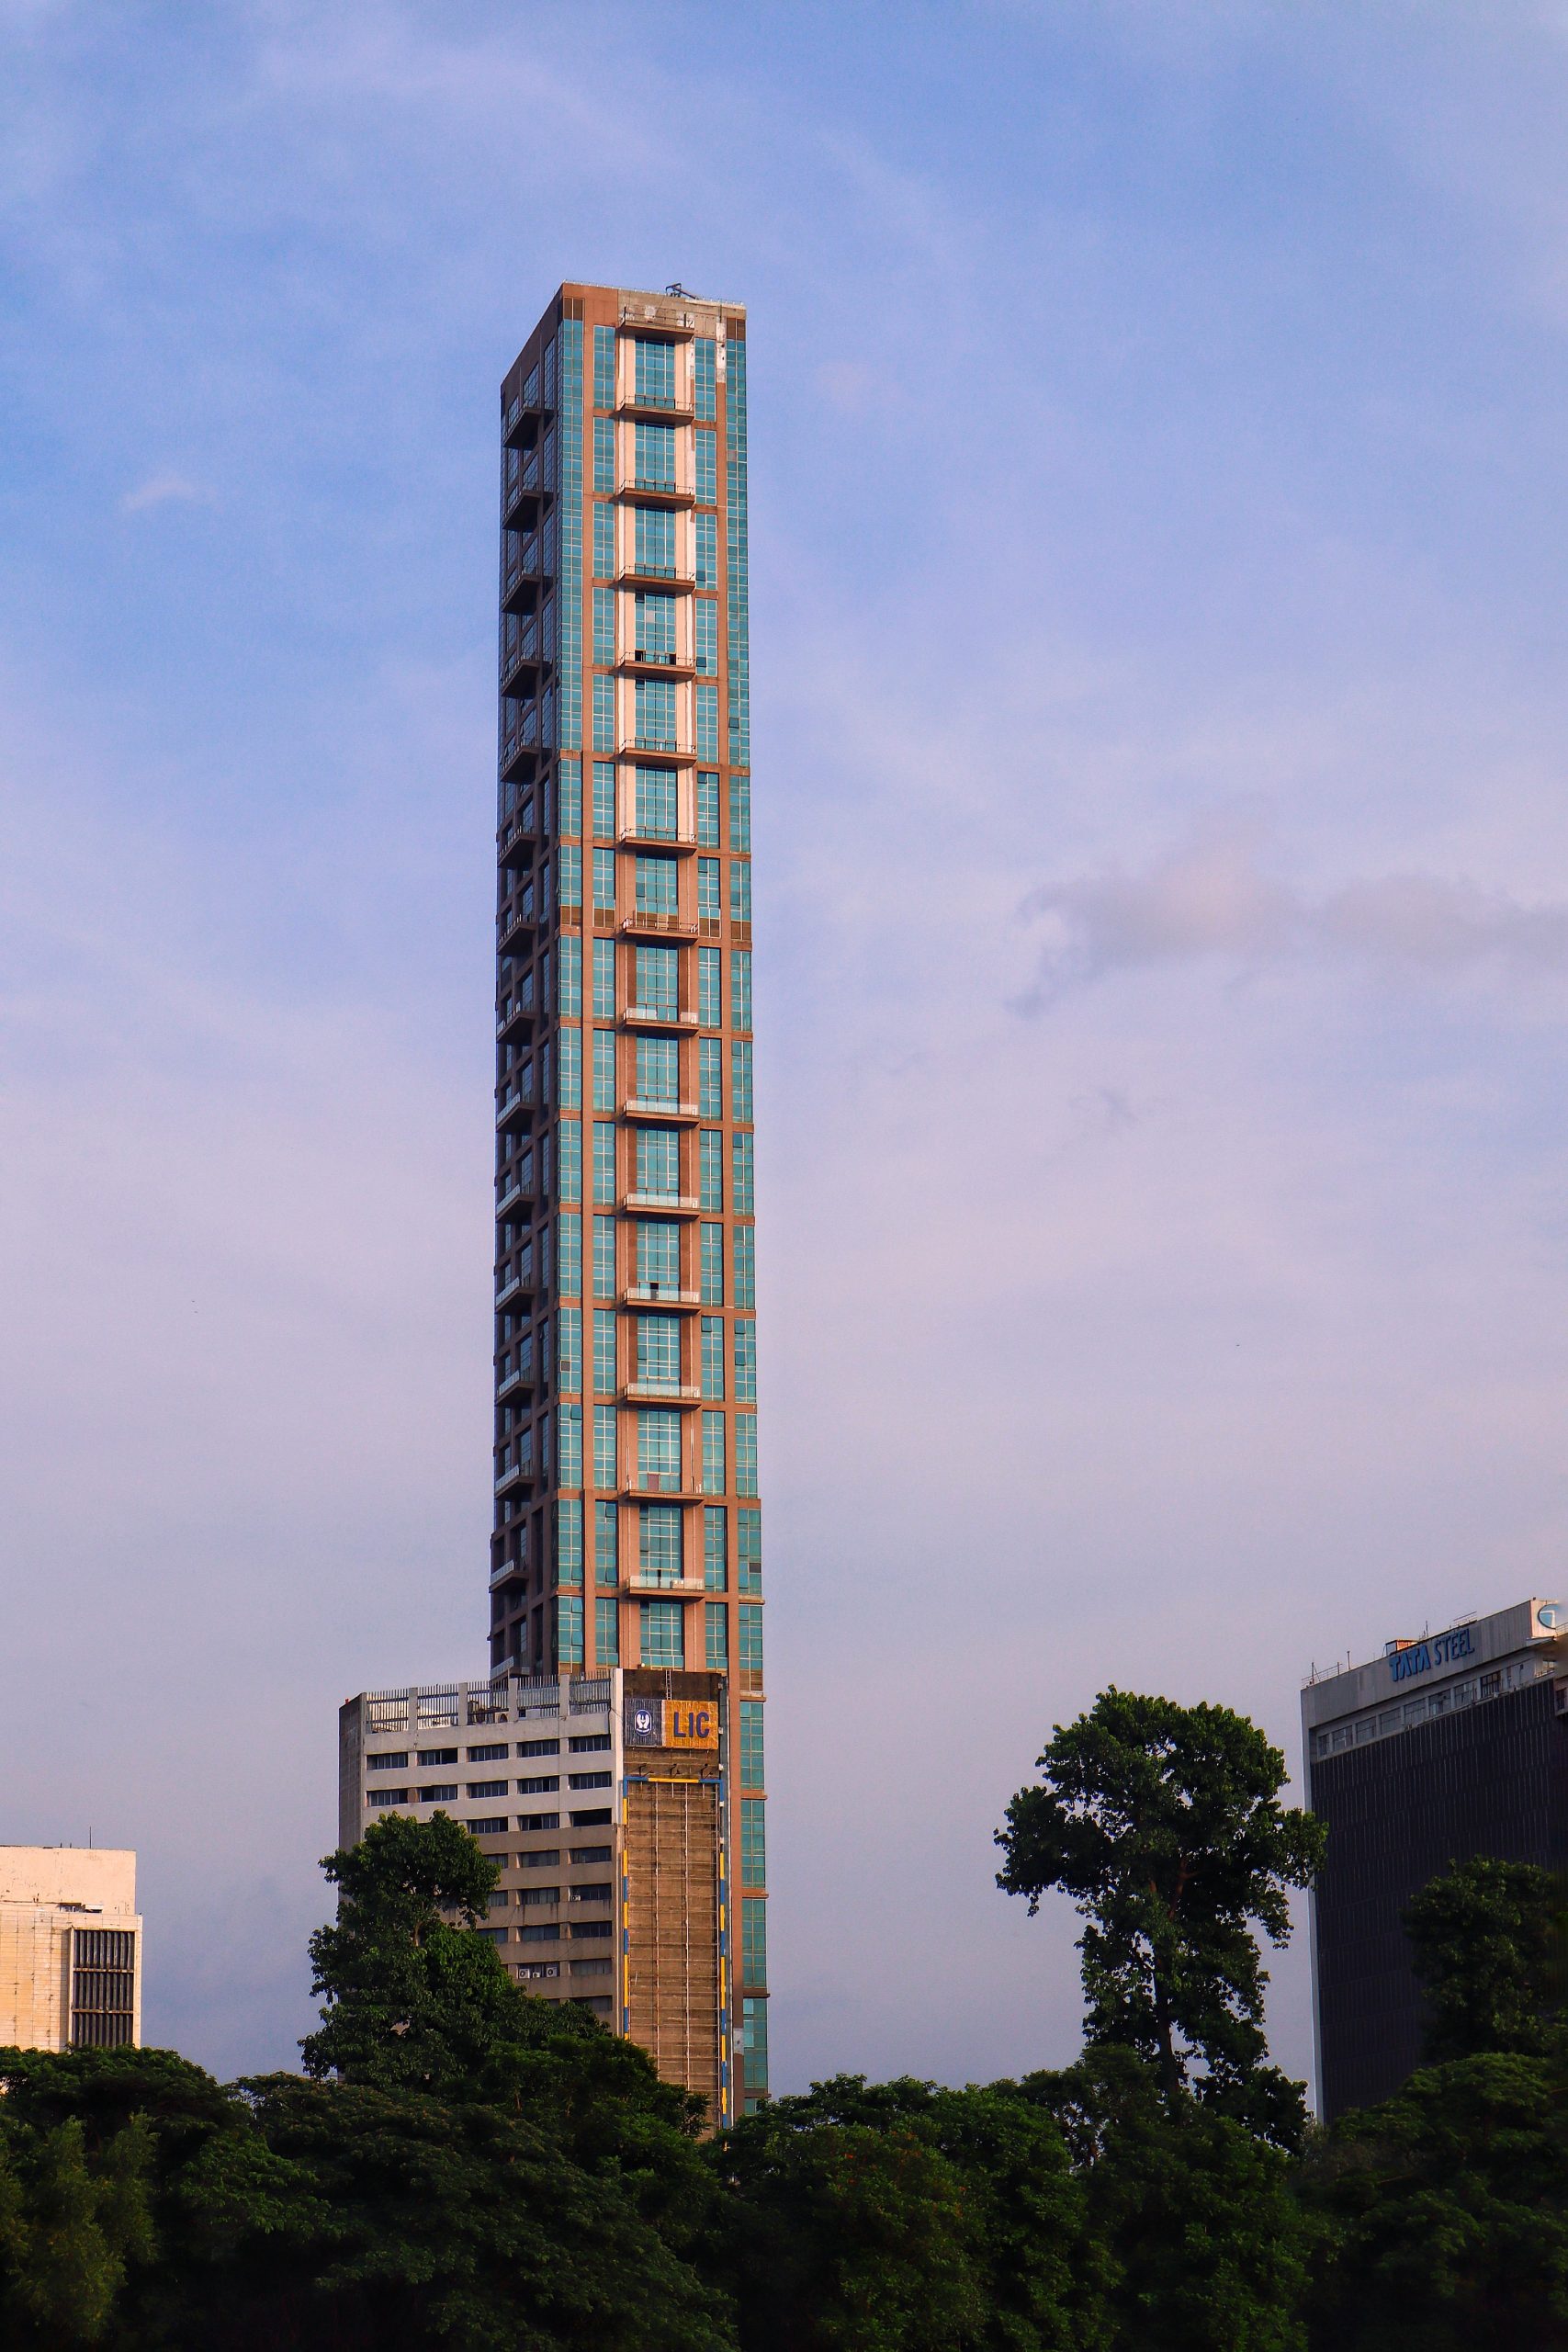 A tall building